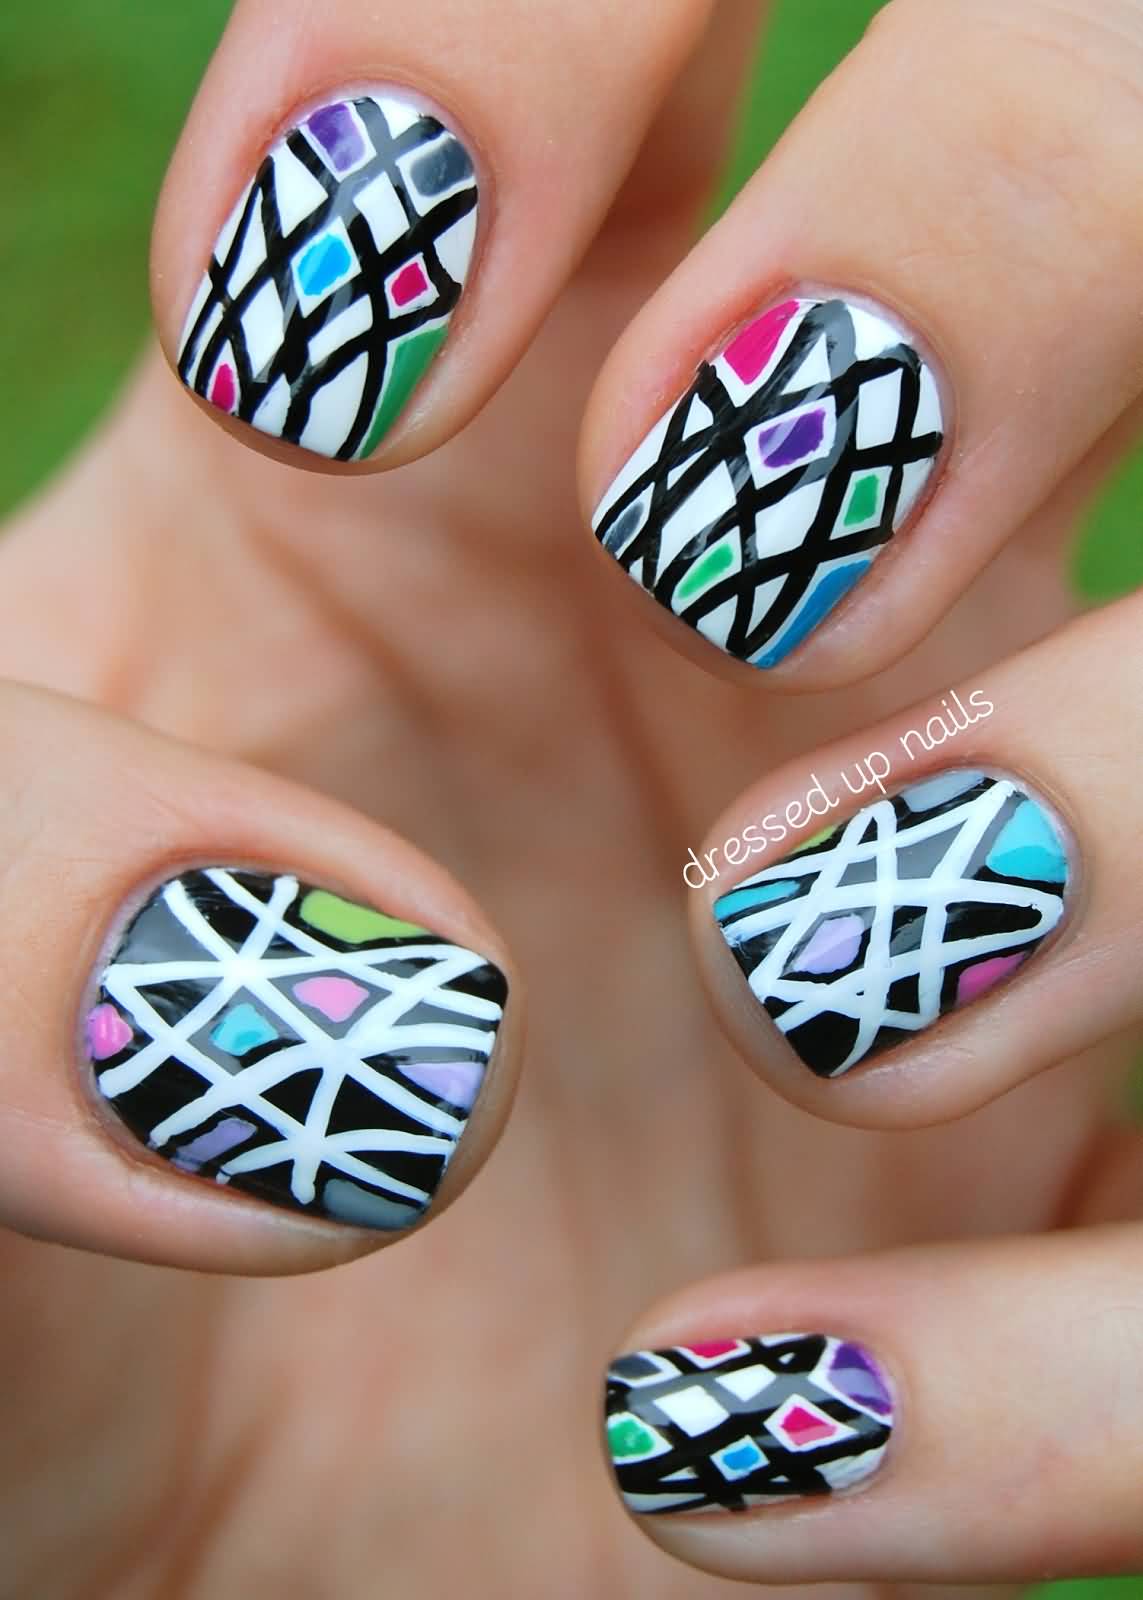 Black And White Geometric Nail Art With Pops Of Color